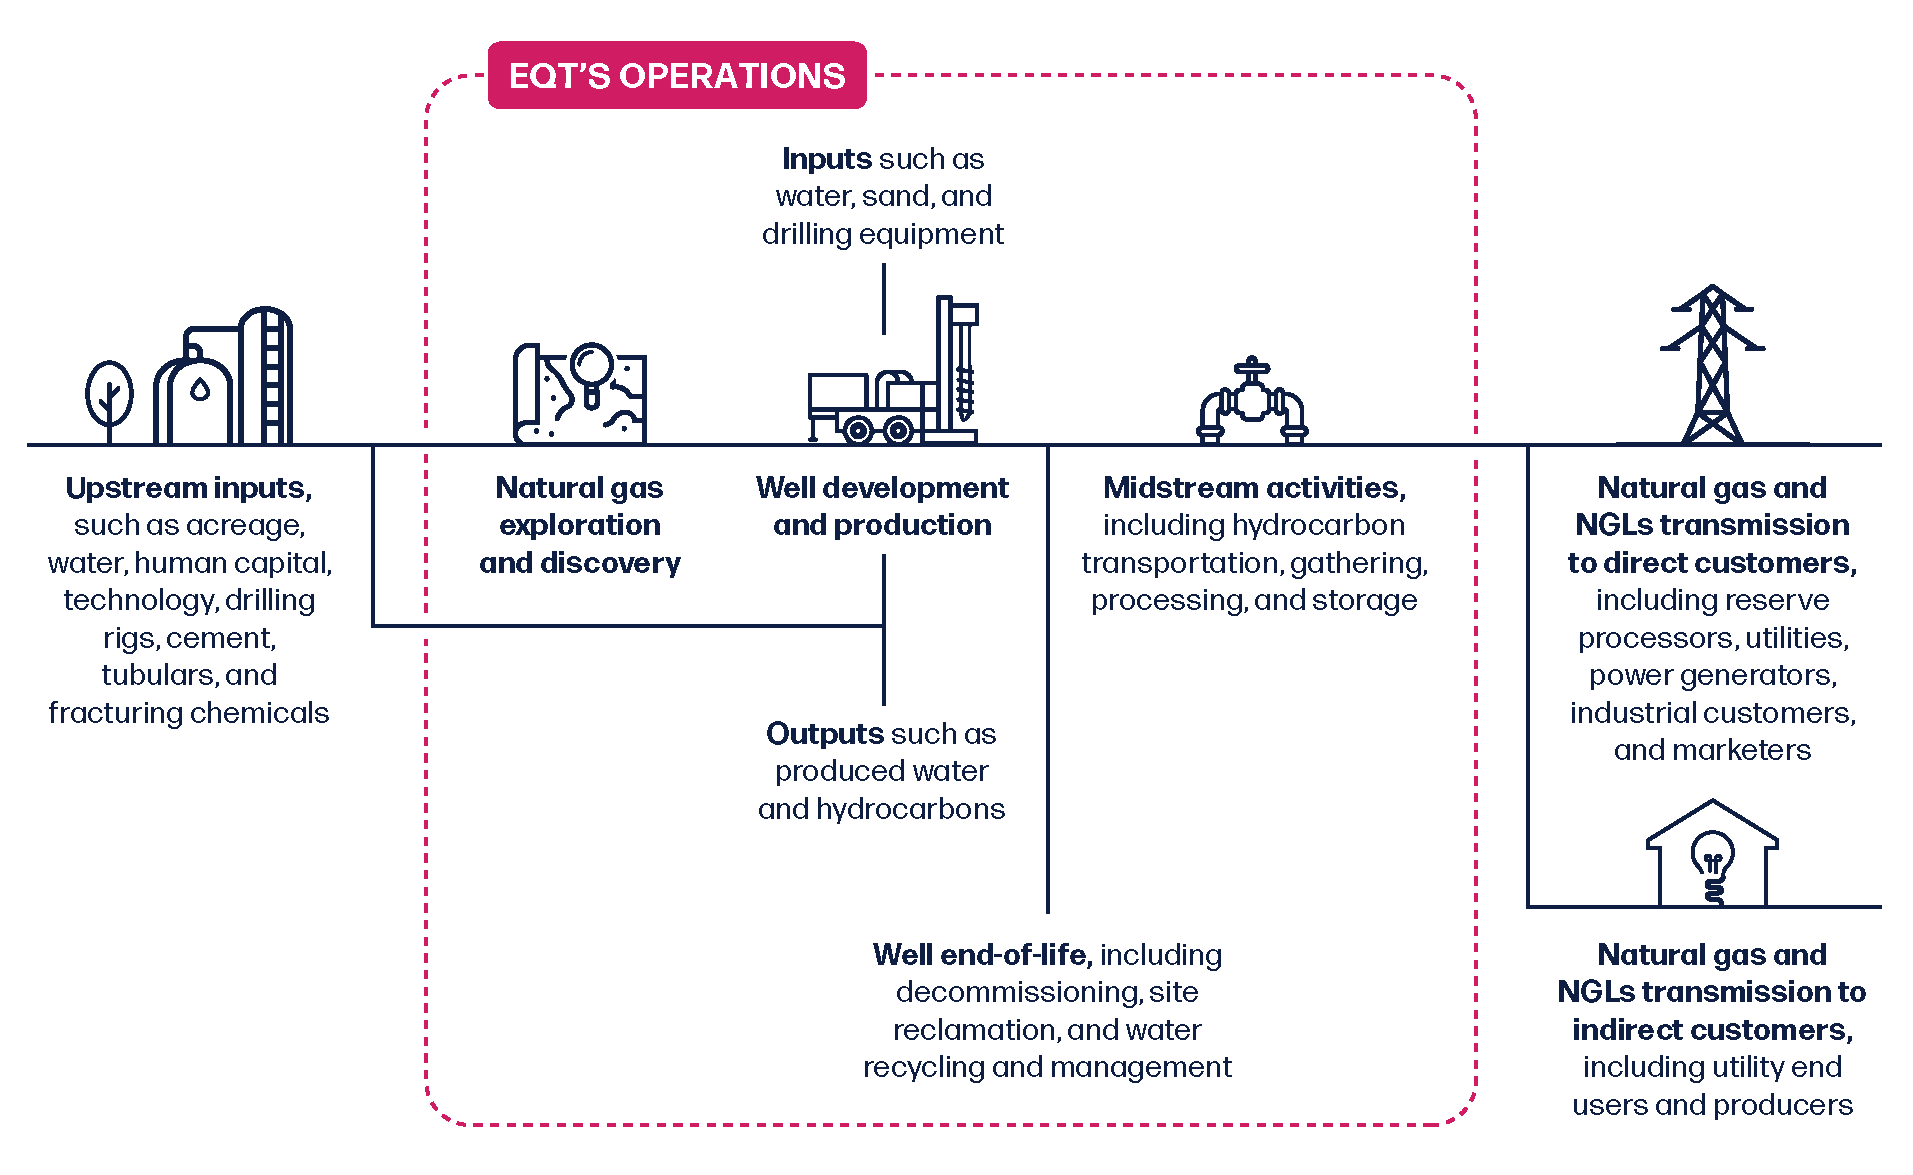 Illustration of EQT's value chain showing the relationship between upstream inputs, EQT operations, and downstream activities. EQT's operations include natural gas exploration and discovery, well development and production, well end-of-life, and midstream activities.